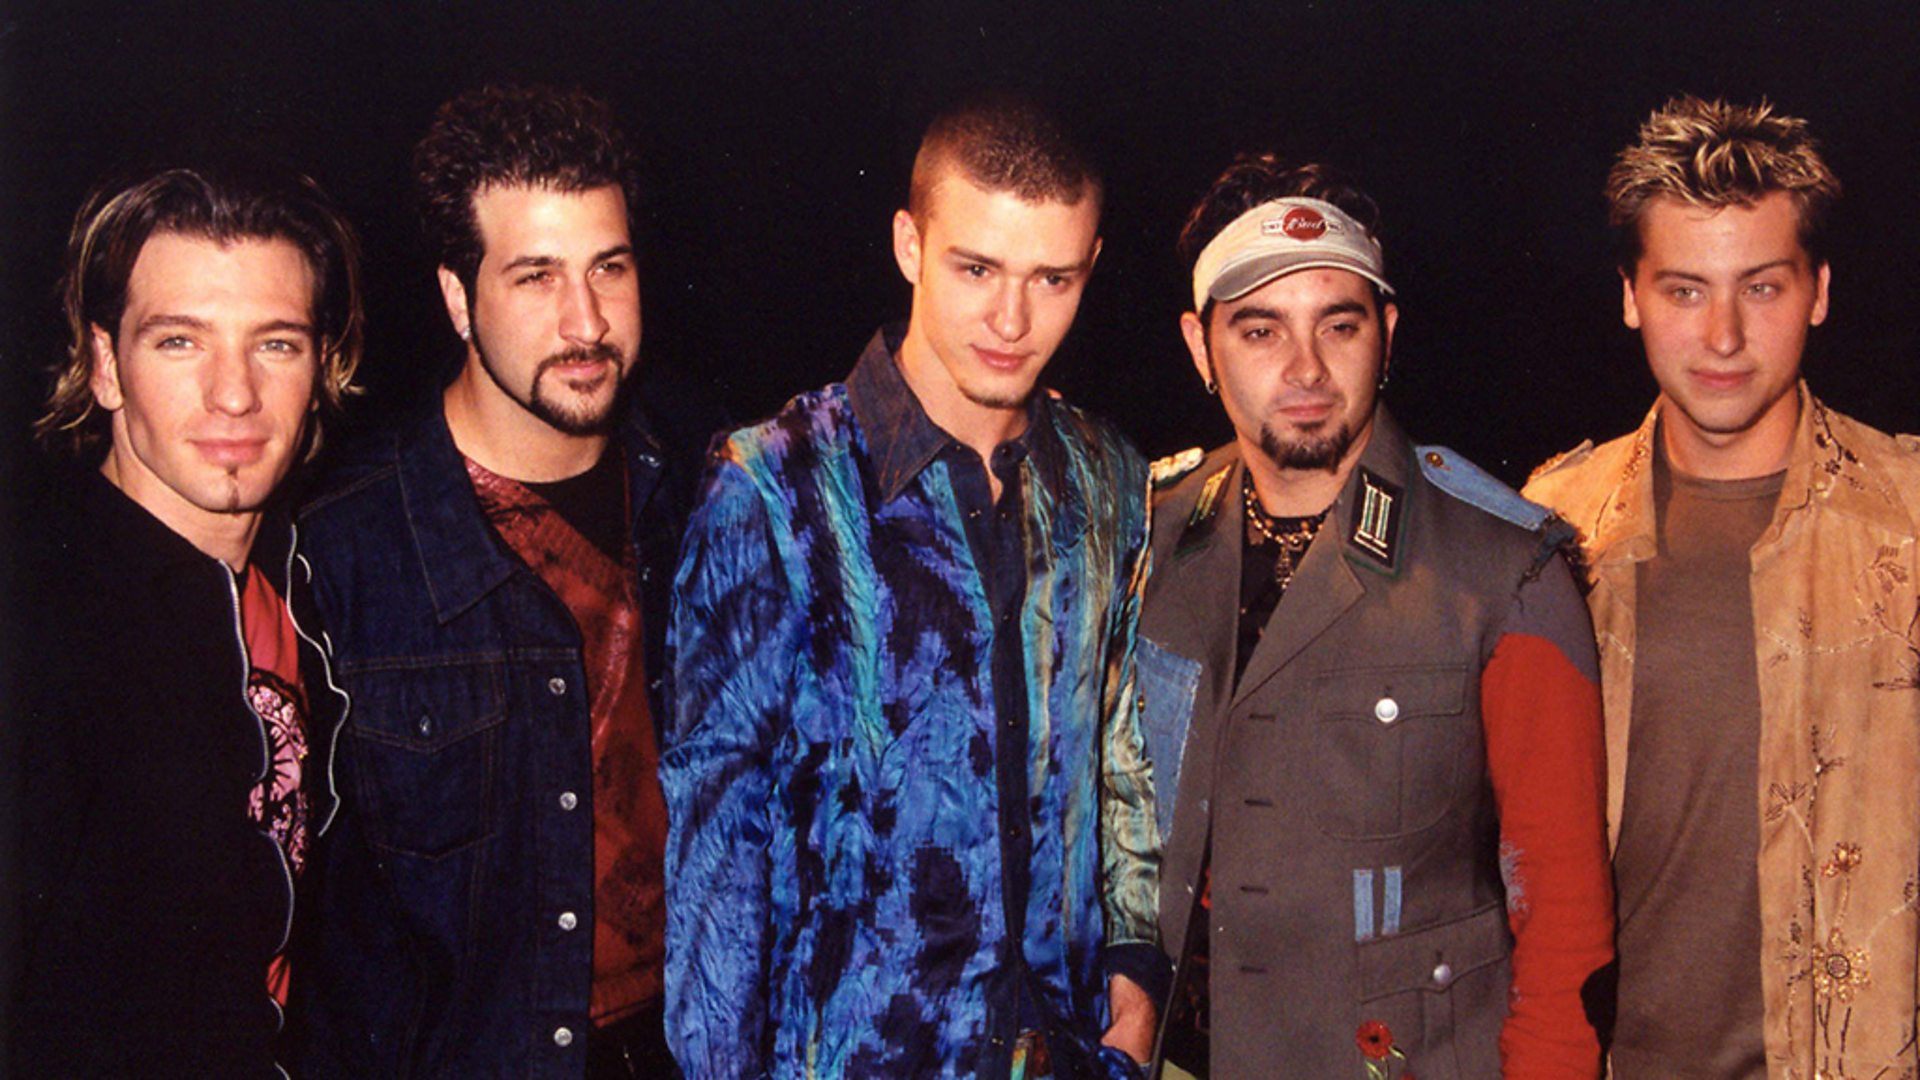 Justin Timberlake Shares Video of NSYNC Reuniting in the Studio